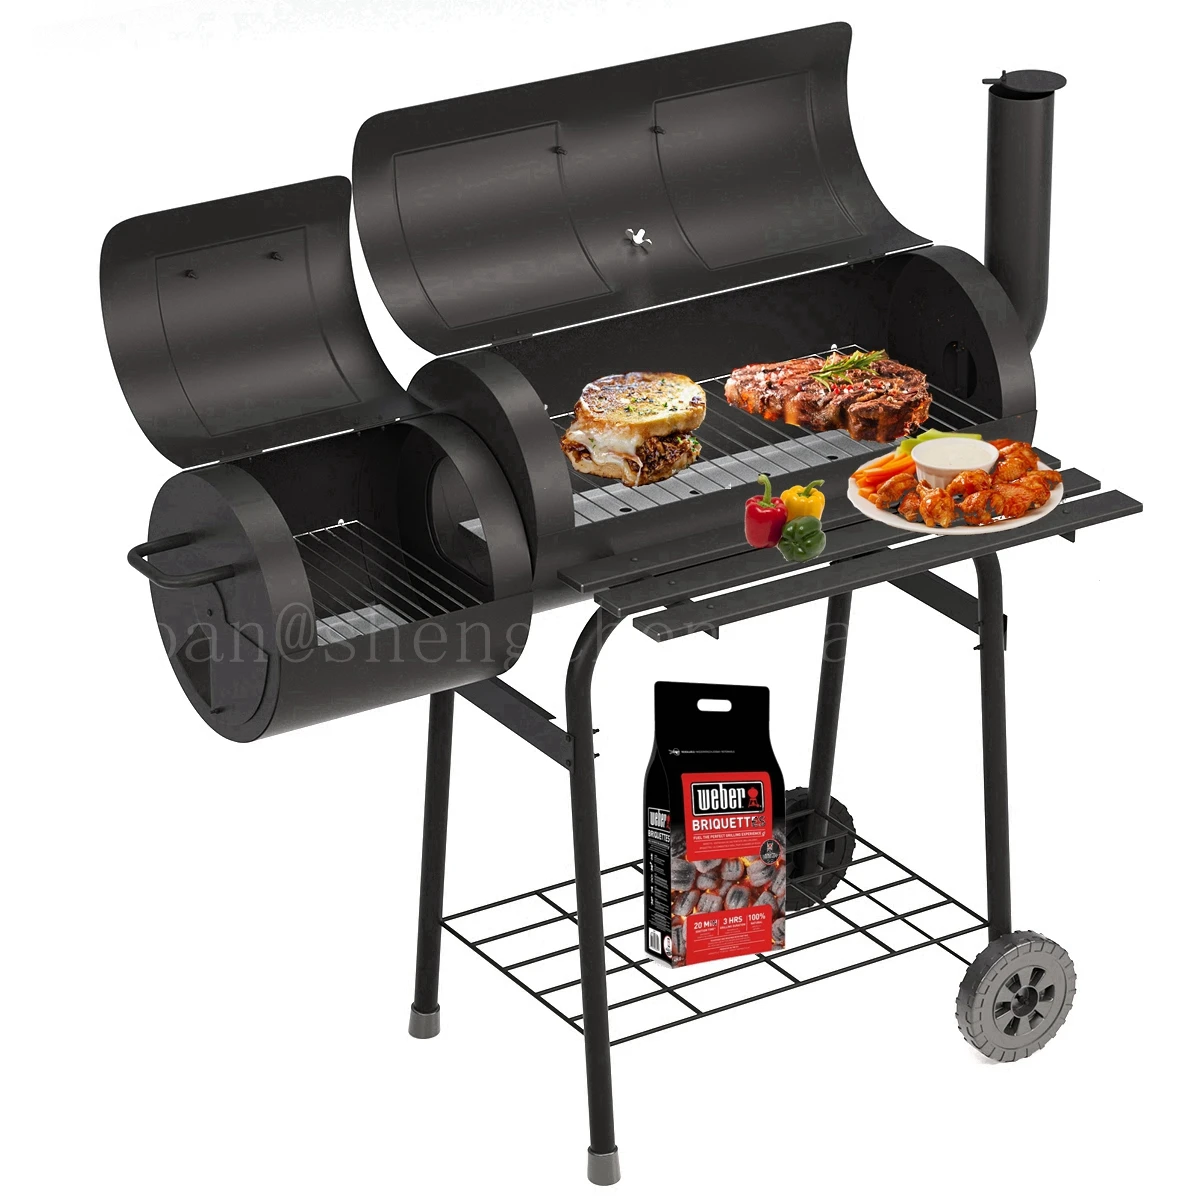 

Stocked Offset Smoker Charcoal BBQ Grills with Large Cooking Area Grill Set